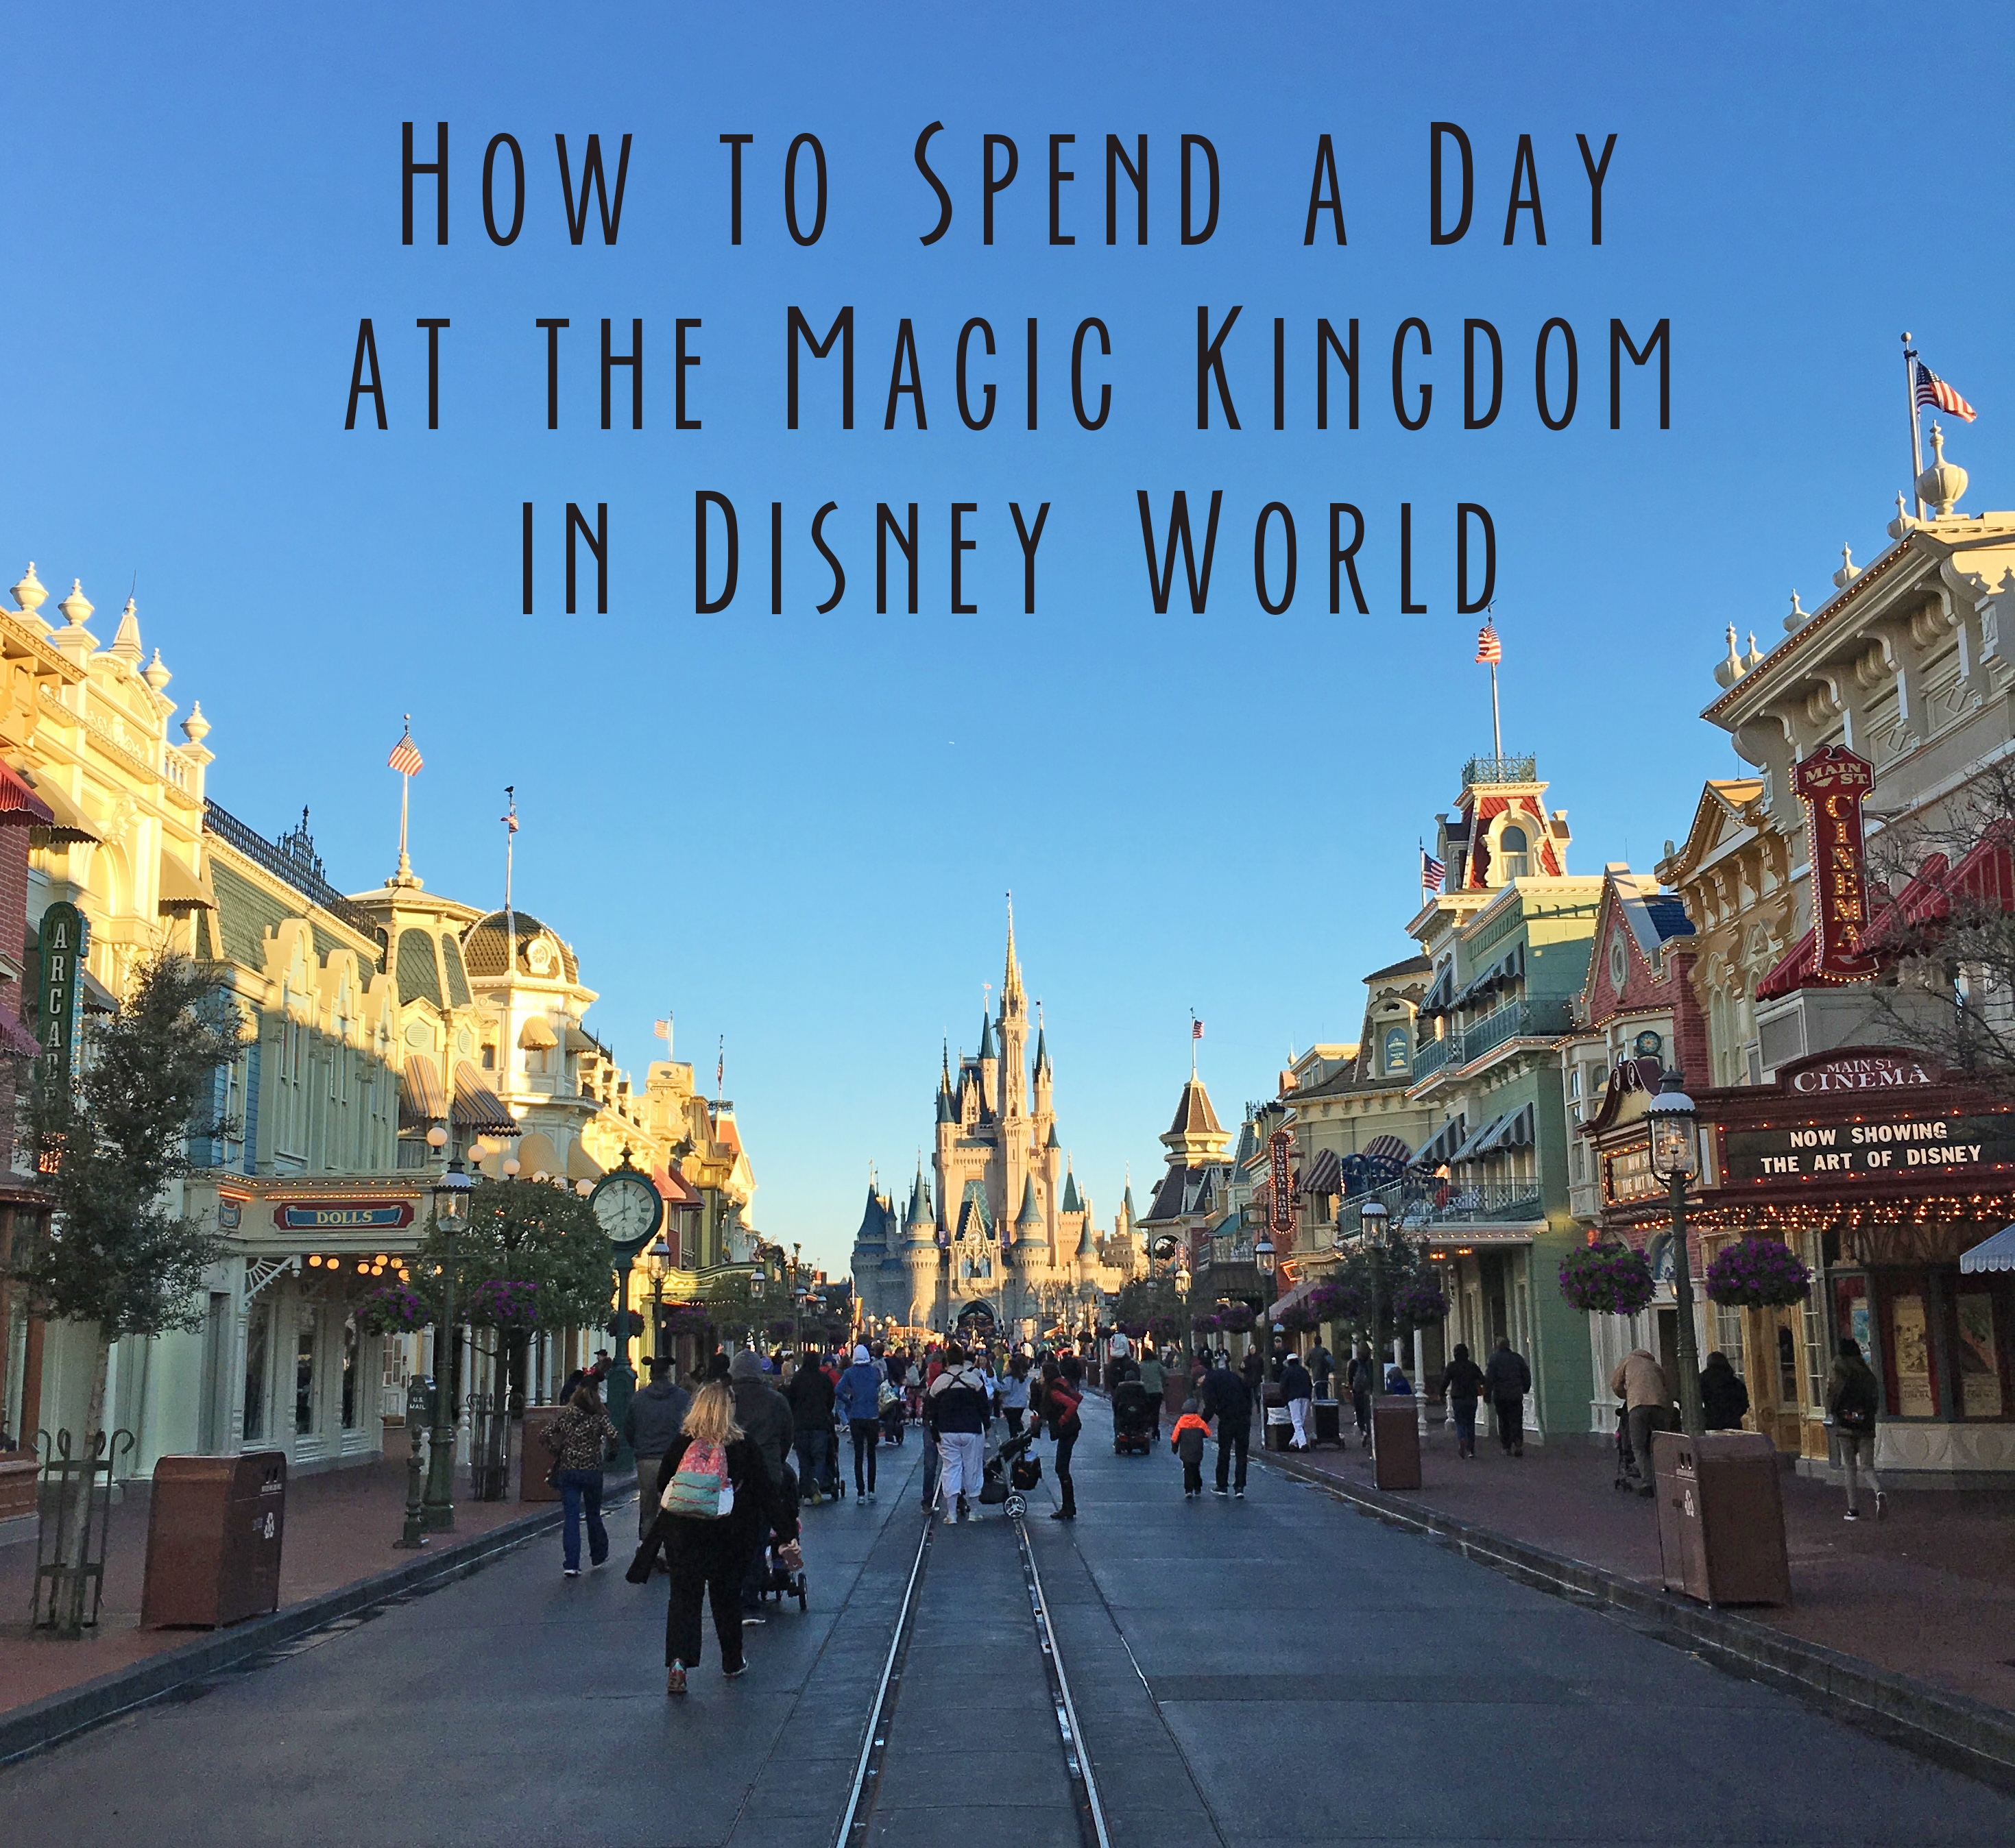 How to Spend a Day ate the Magic Kingdom in Disney World title card showing main street leading to the castle